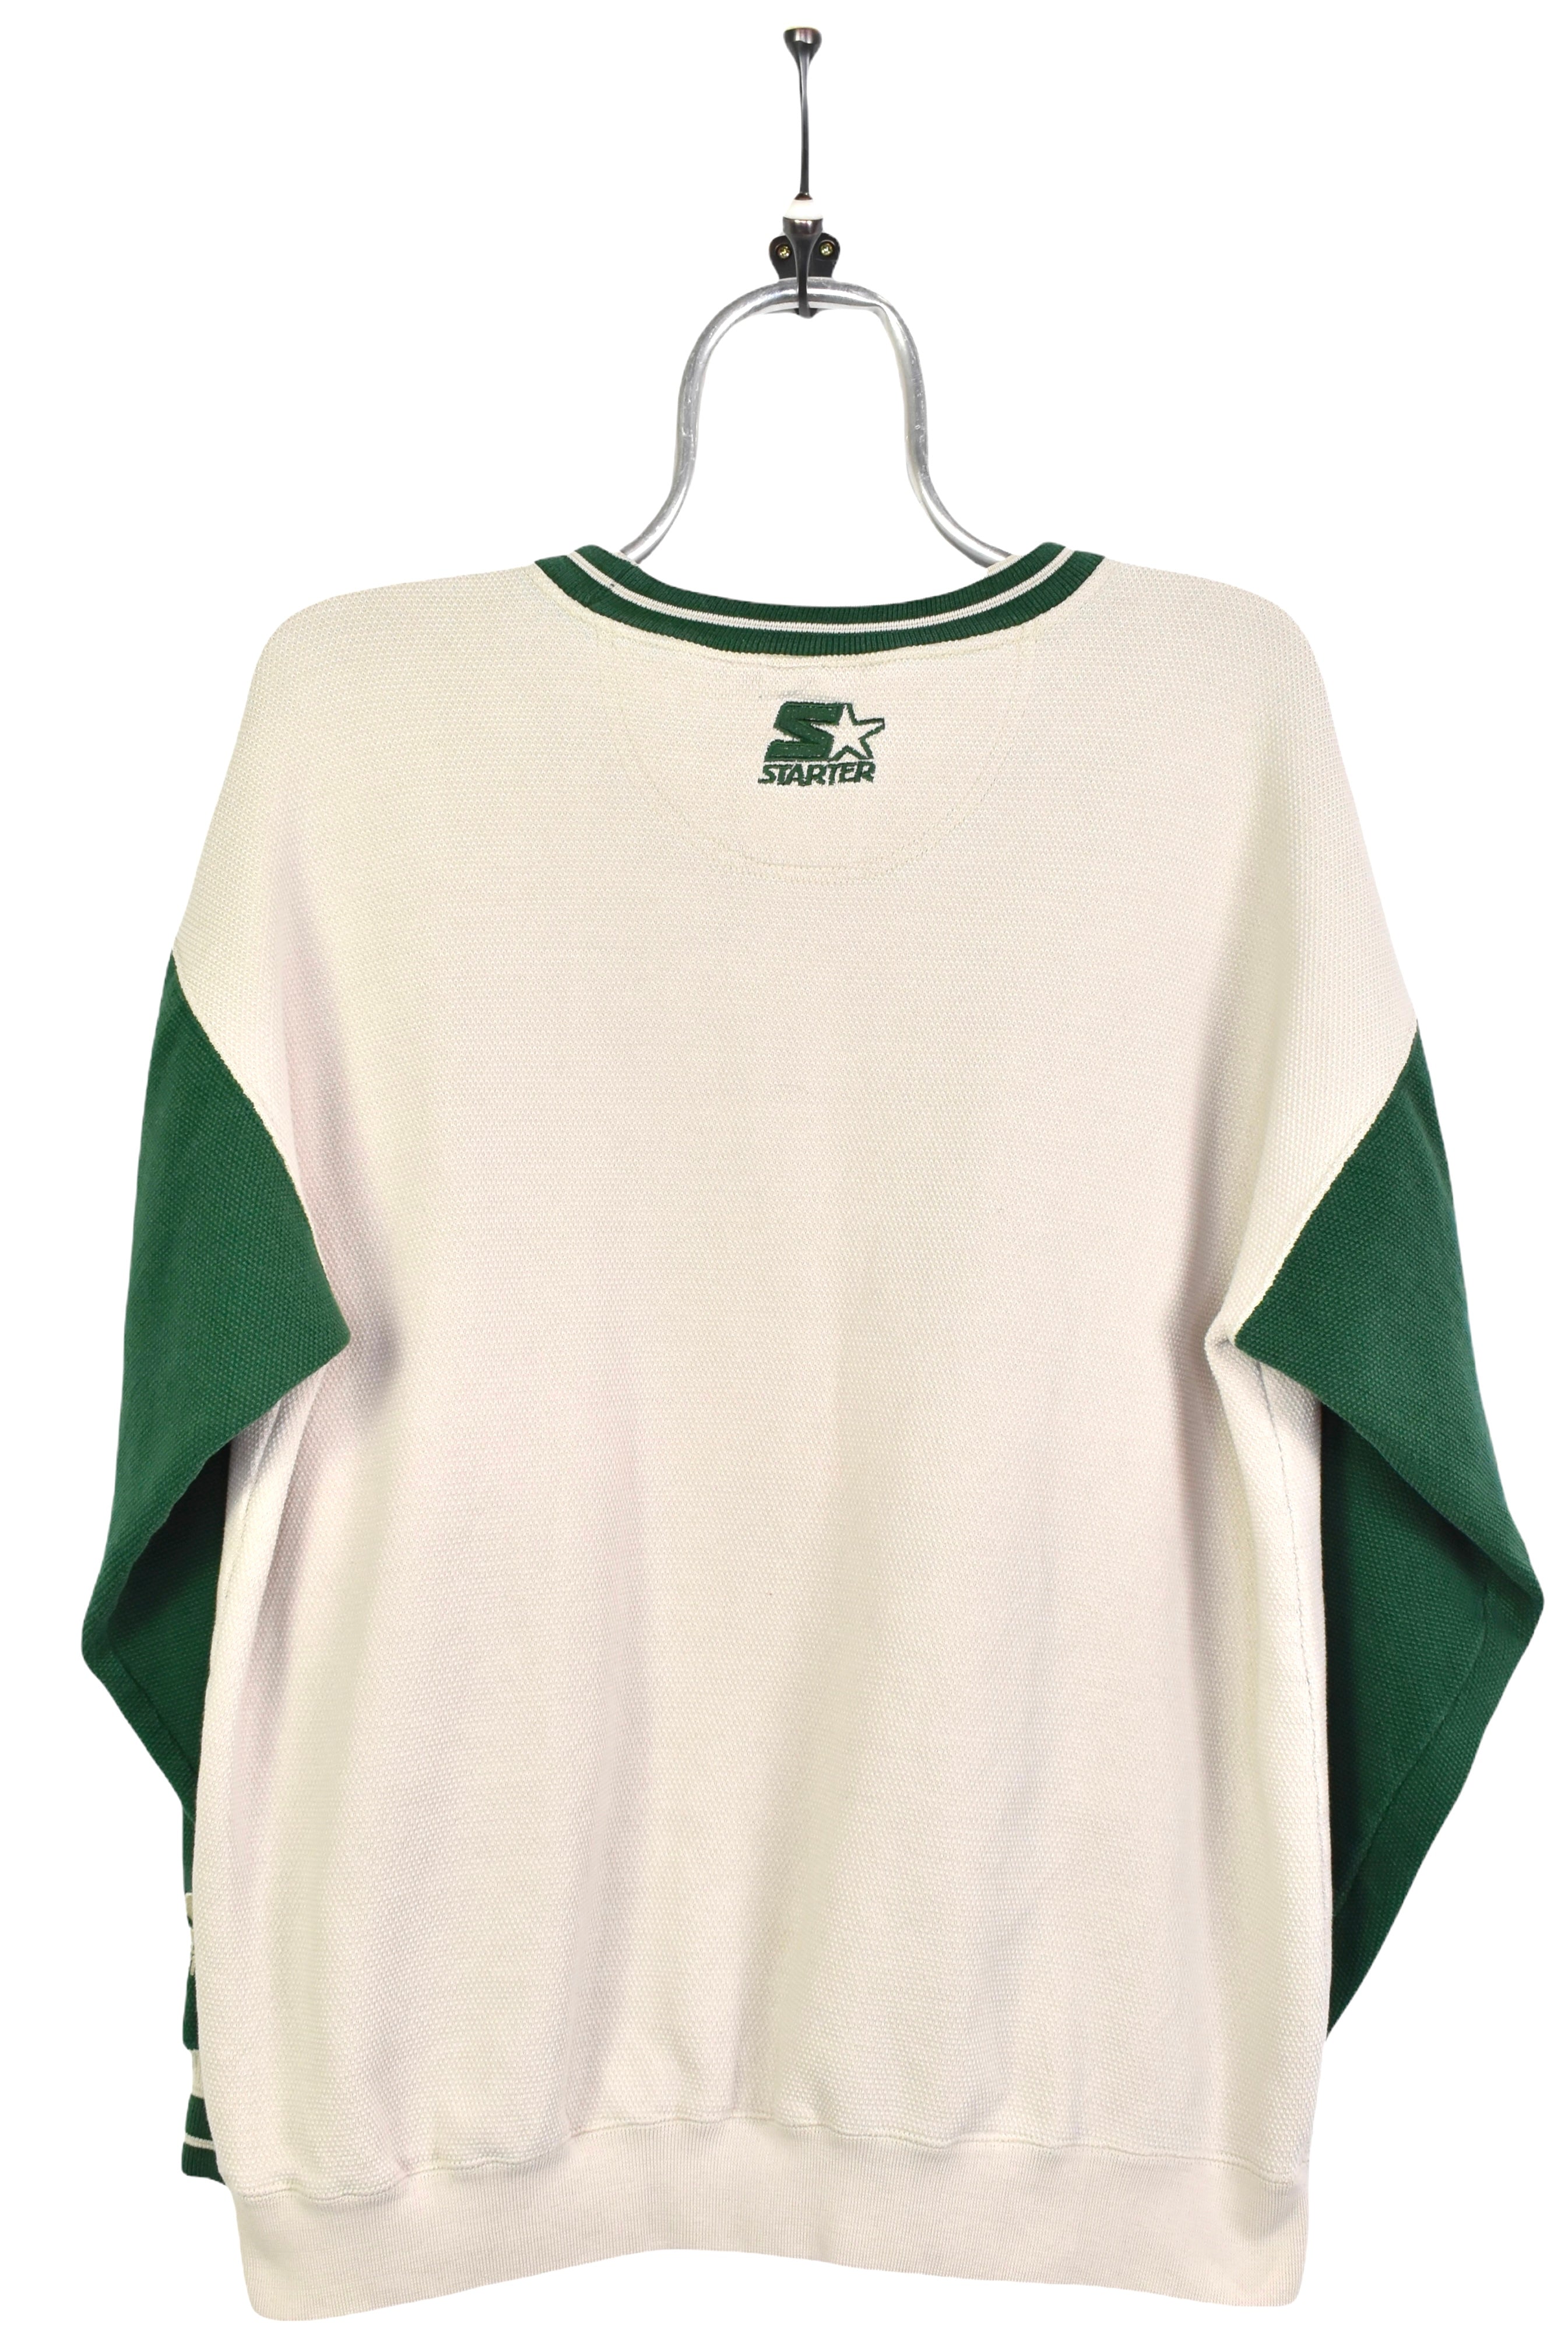 Vintage NFL Green Bay Packers embroidered cream sweatshirt | Large PRO SPORT